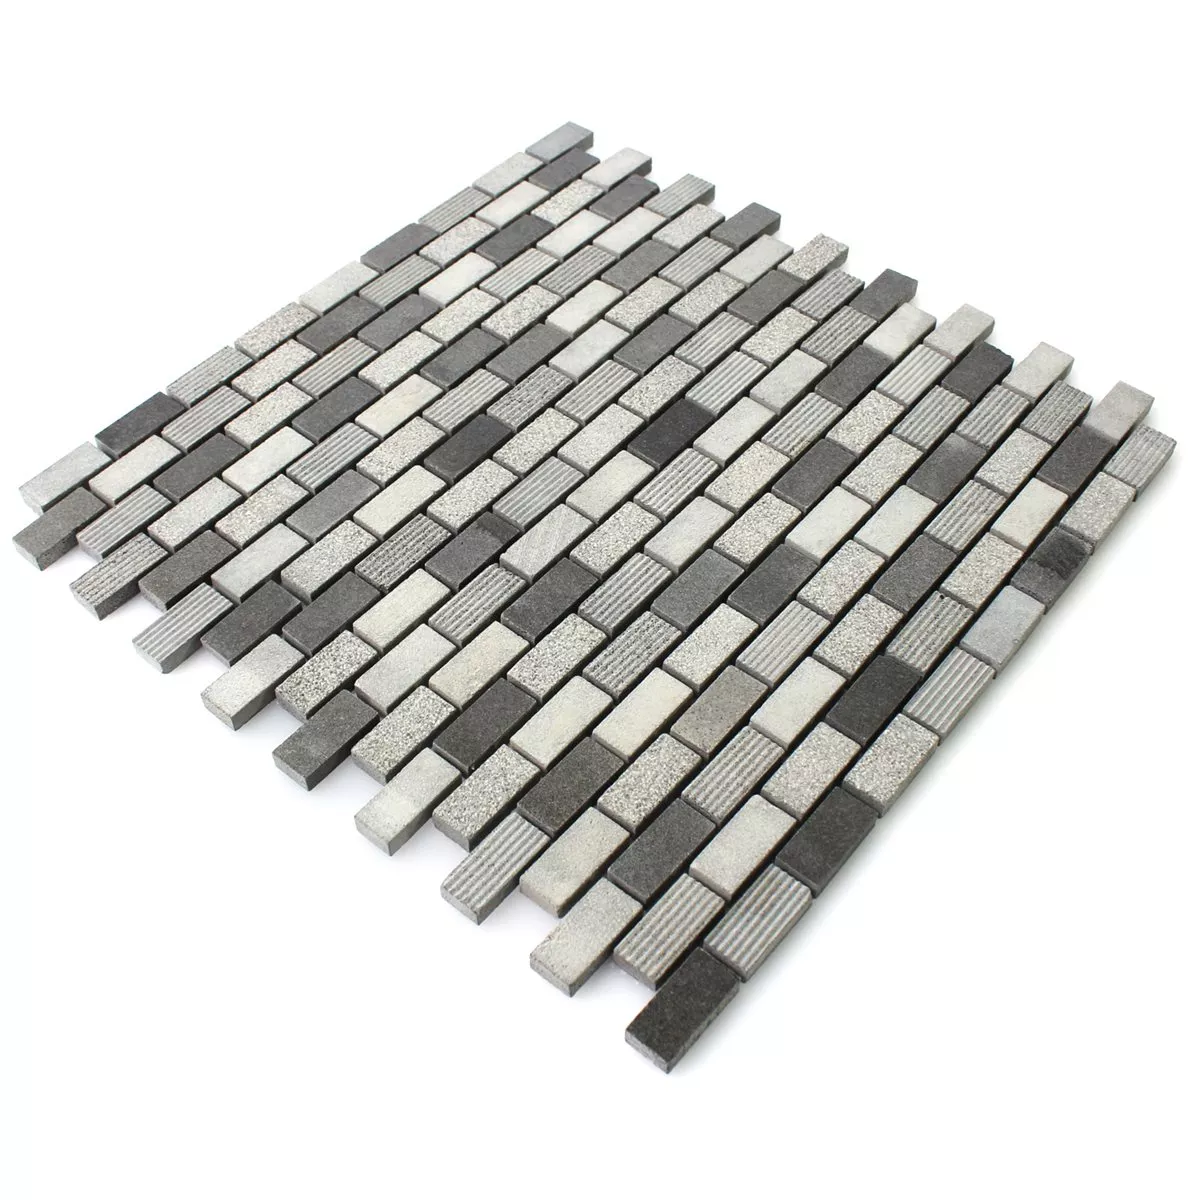 Sample Mosaic Tiles Natural Stone Notte Anthracite